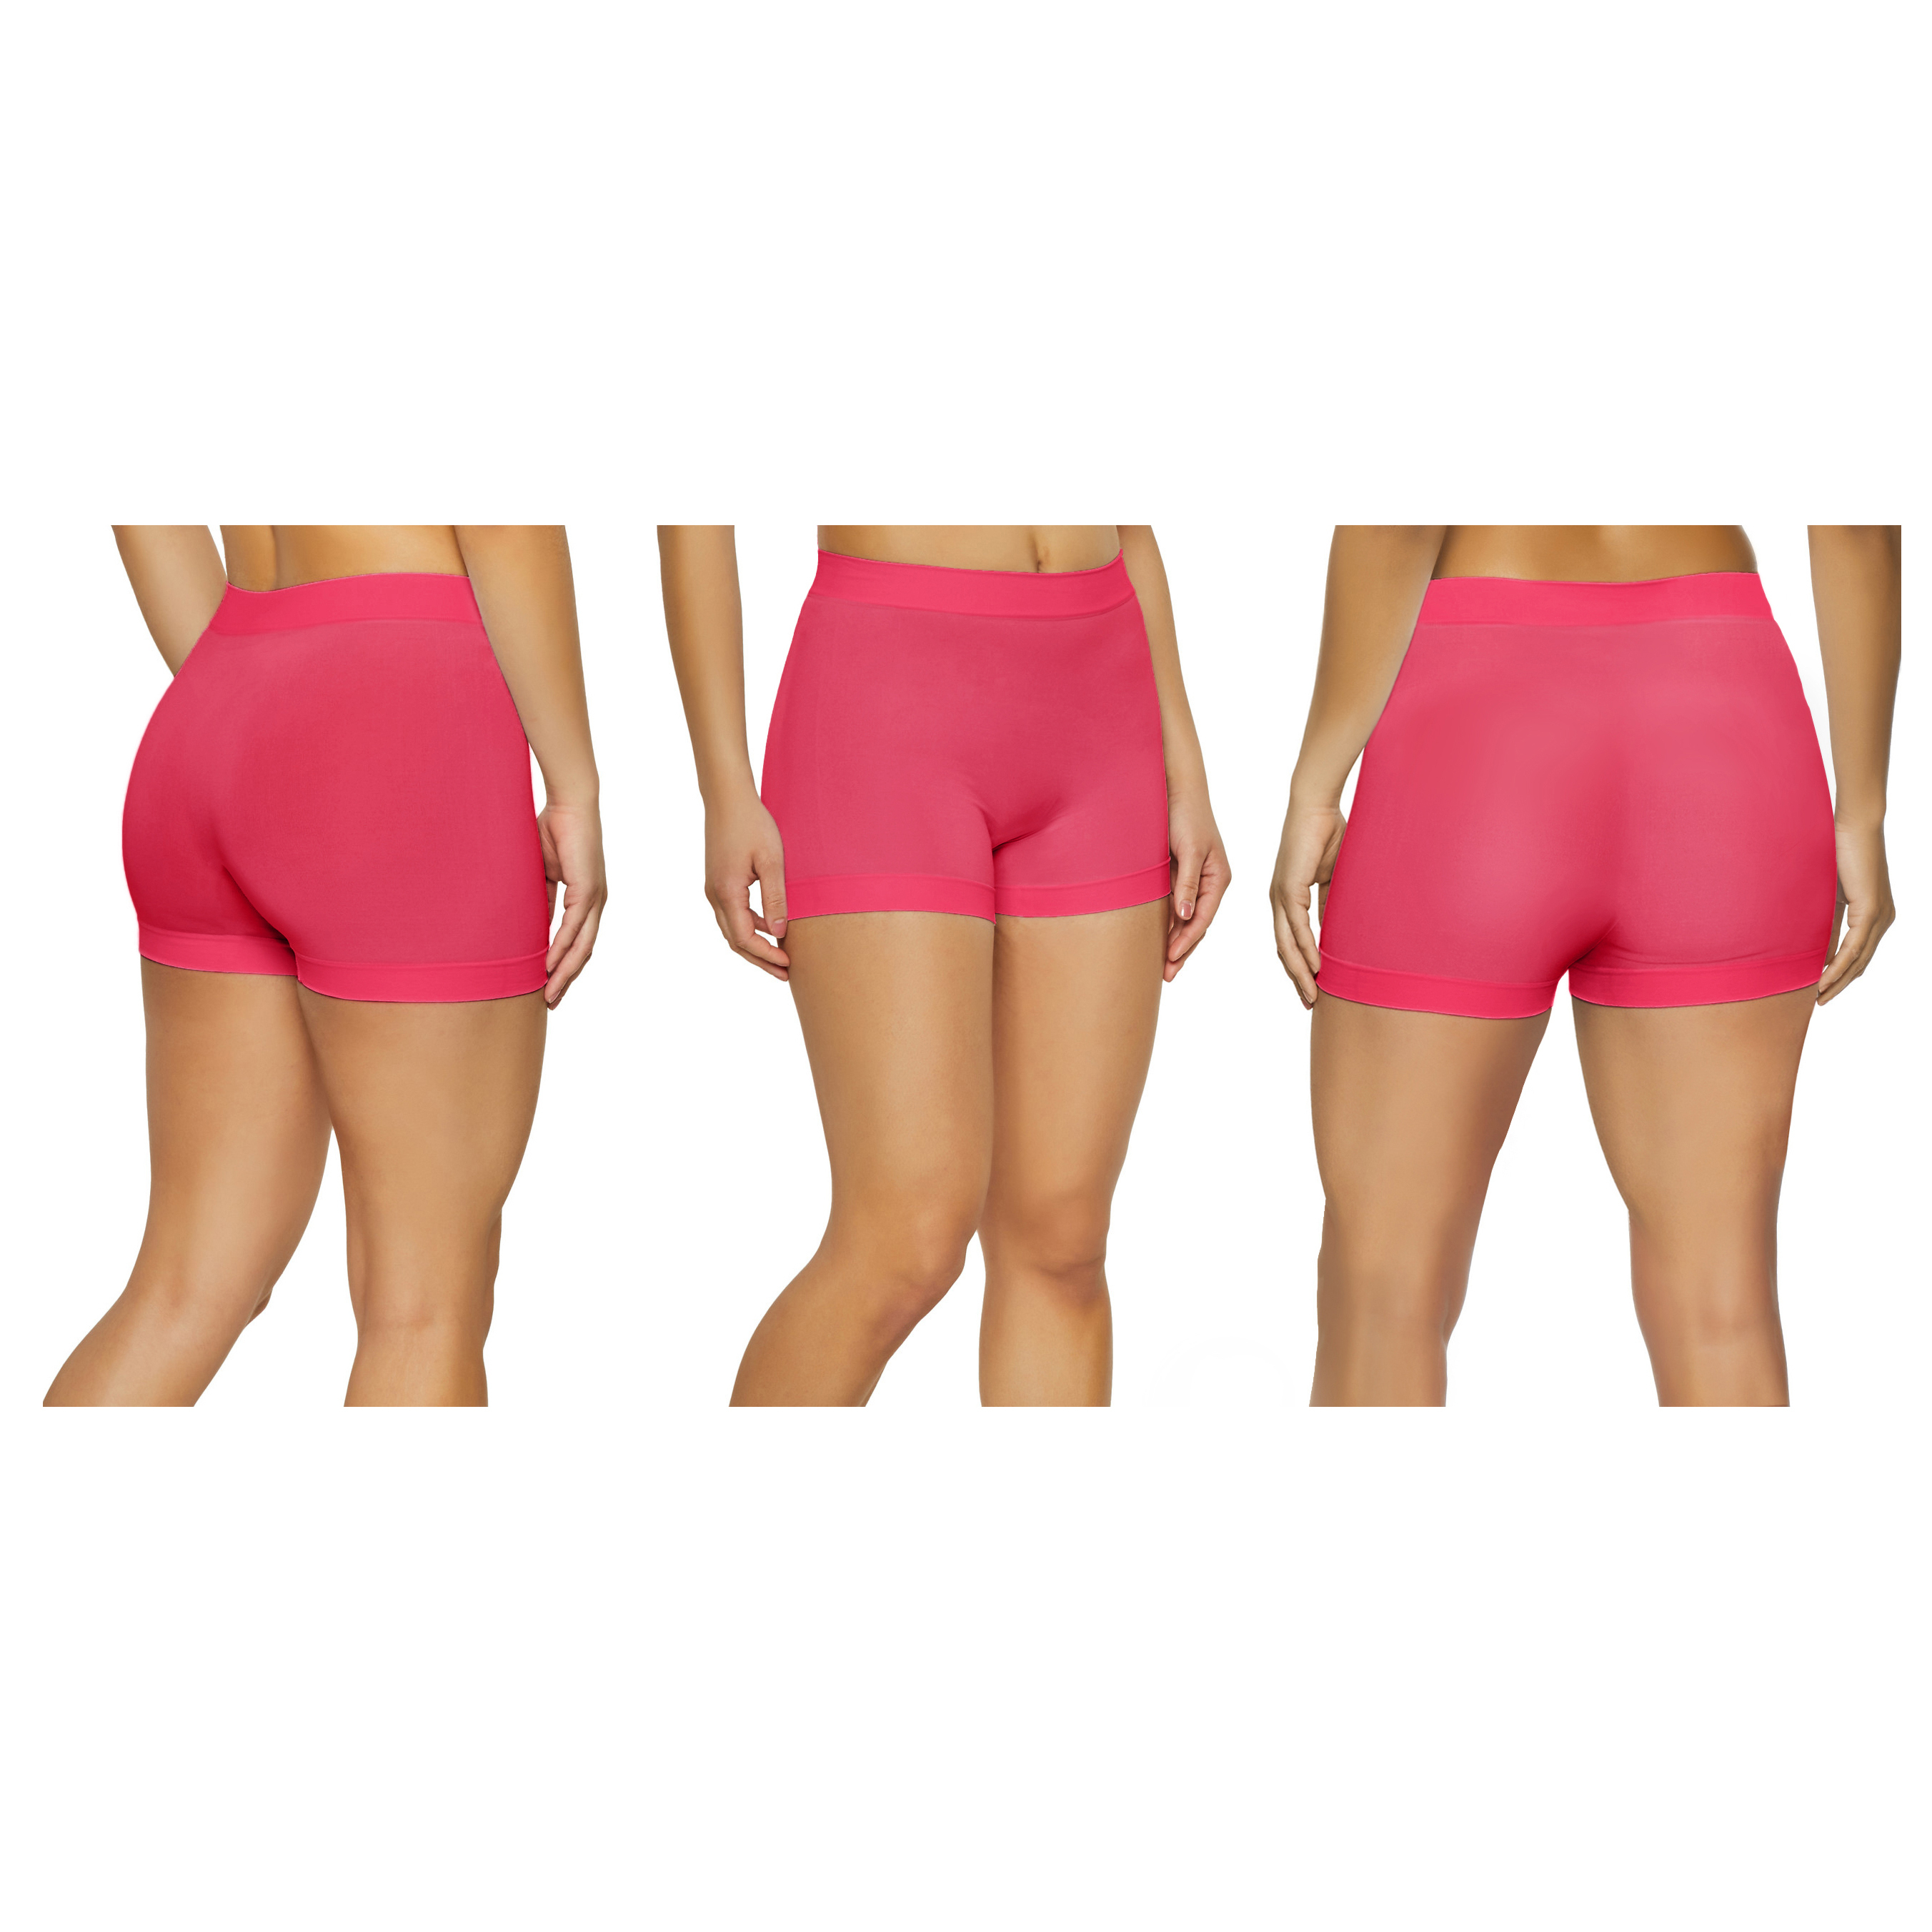 12-Pack Women's High Waisted Biker Bottom Shorts For Yoga Gym Running Ladies Pants - ASSORTED, L